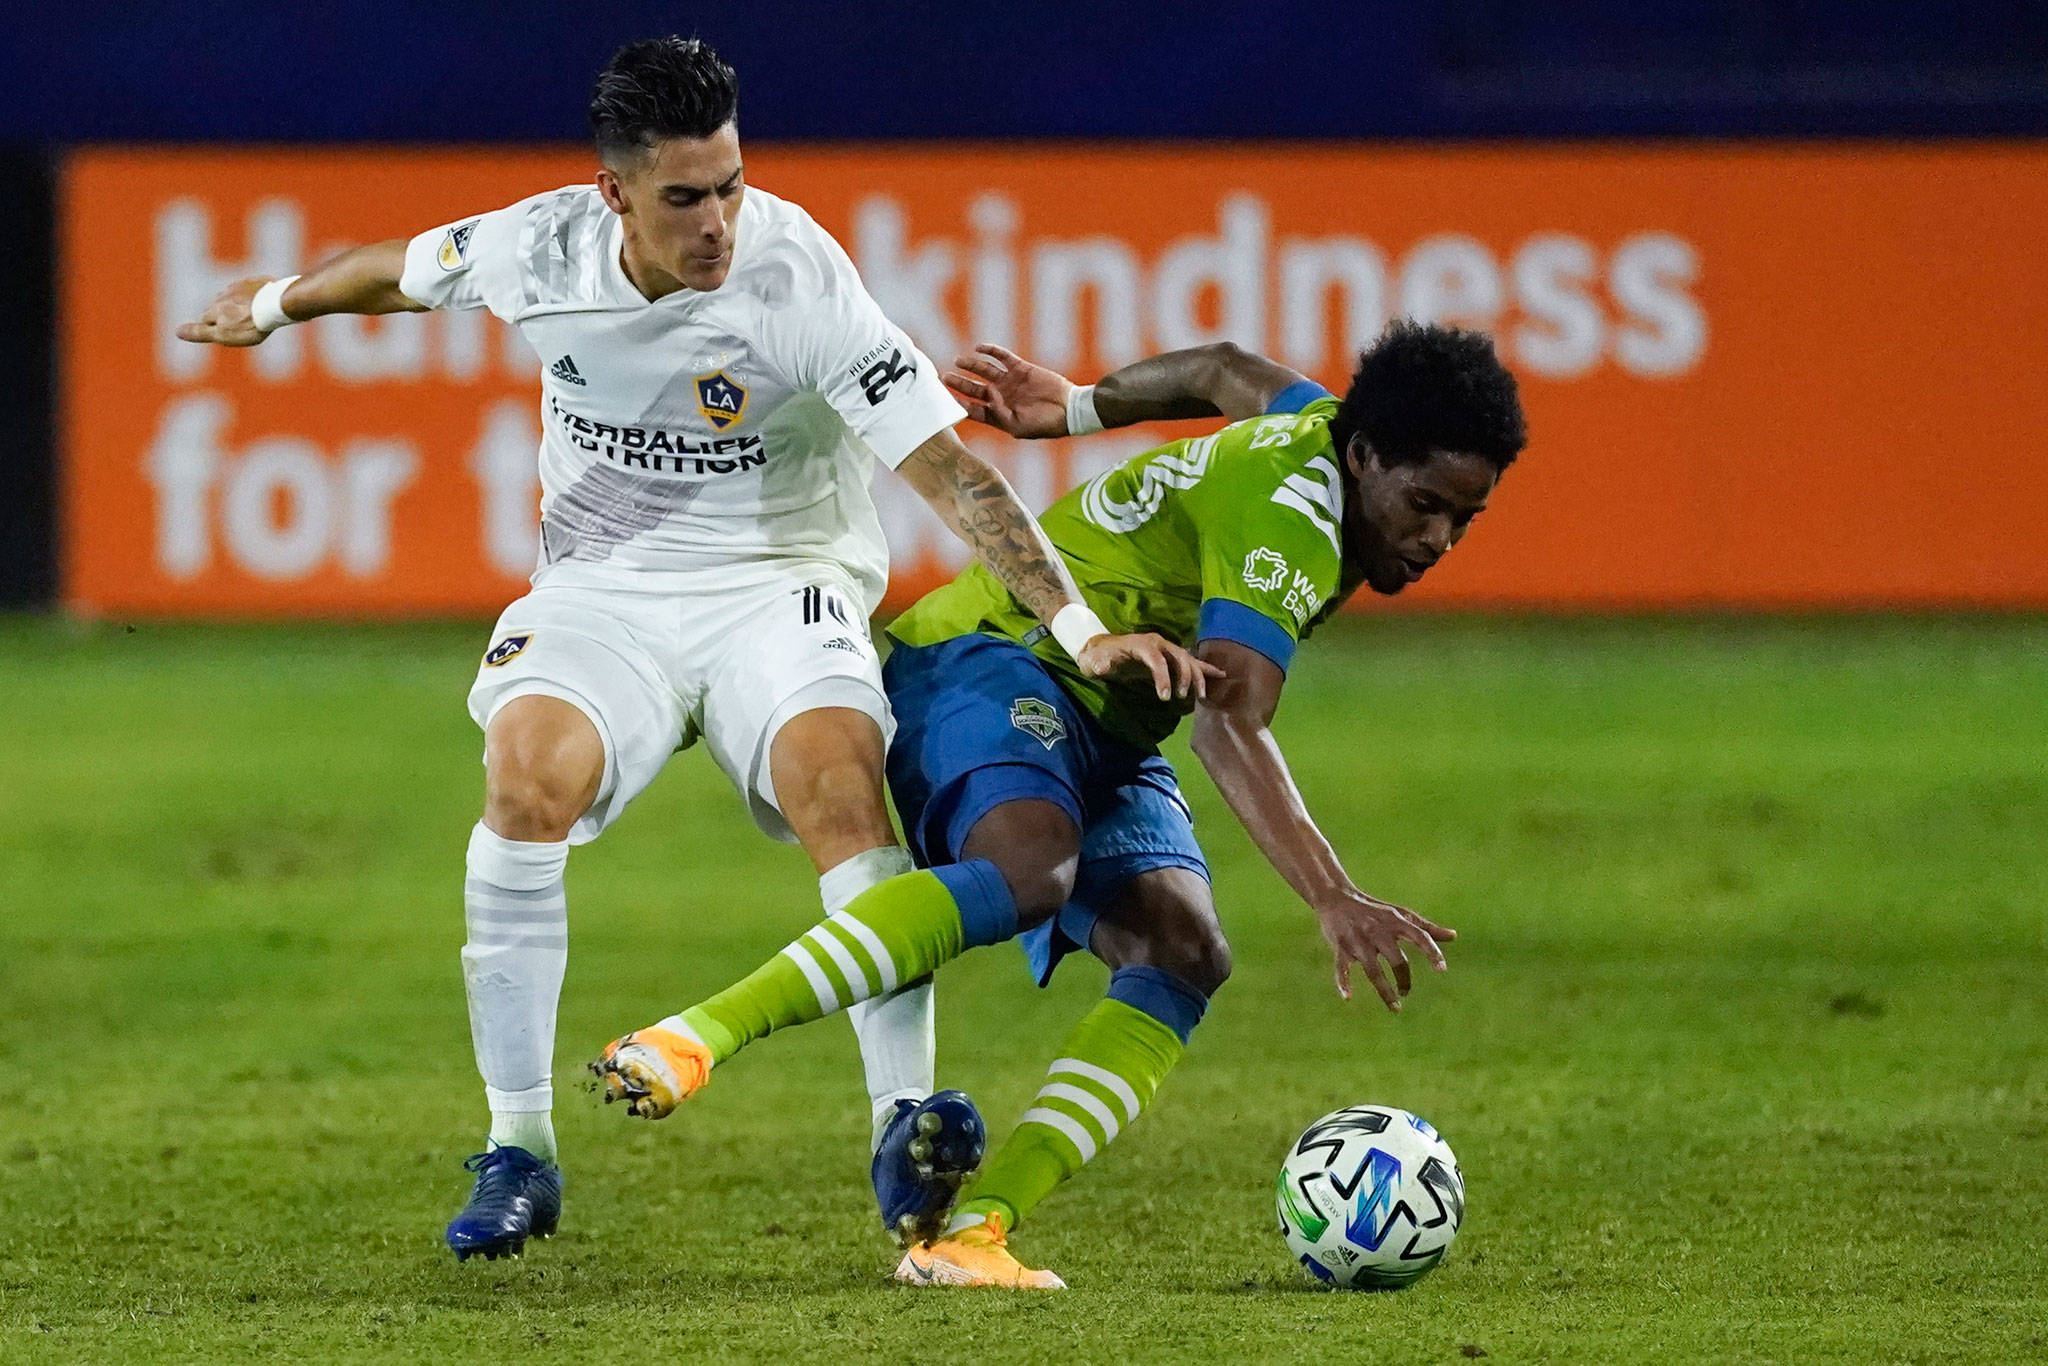 LA Galaxy forward Cristian Pavon (left) trips Sounders defender Joevin Jones during the first half of an MLS match on Nov. 4, 2020, in Carson, Calif. (AP Photo/Ashley Landis)